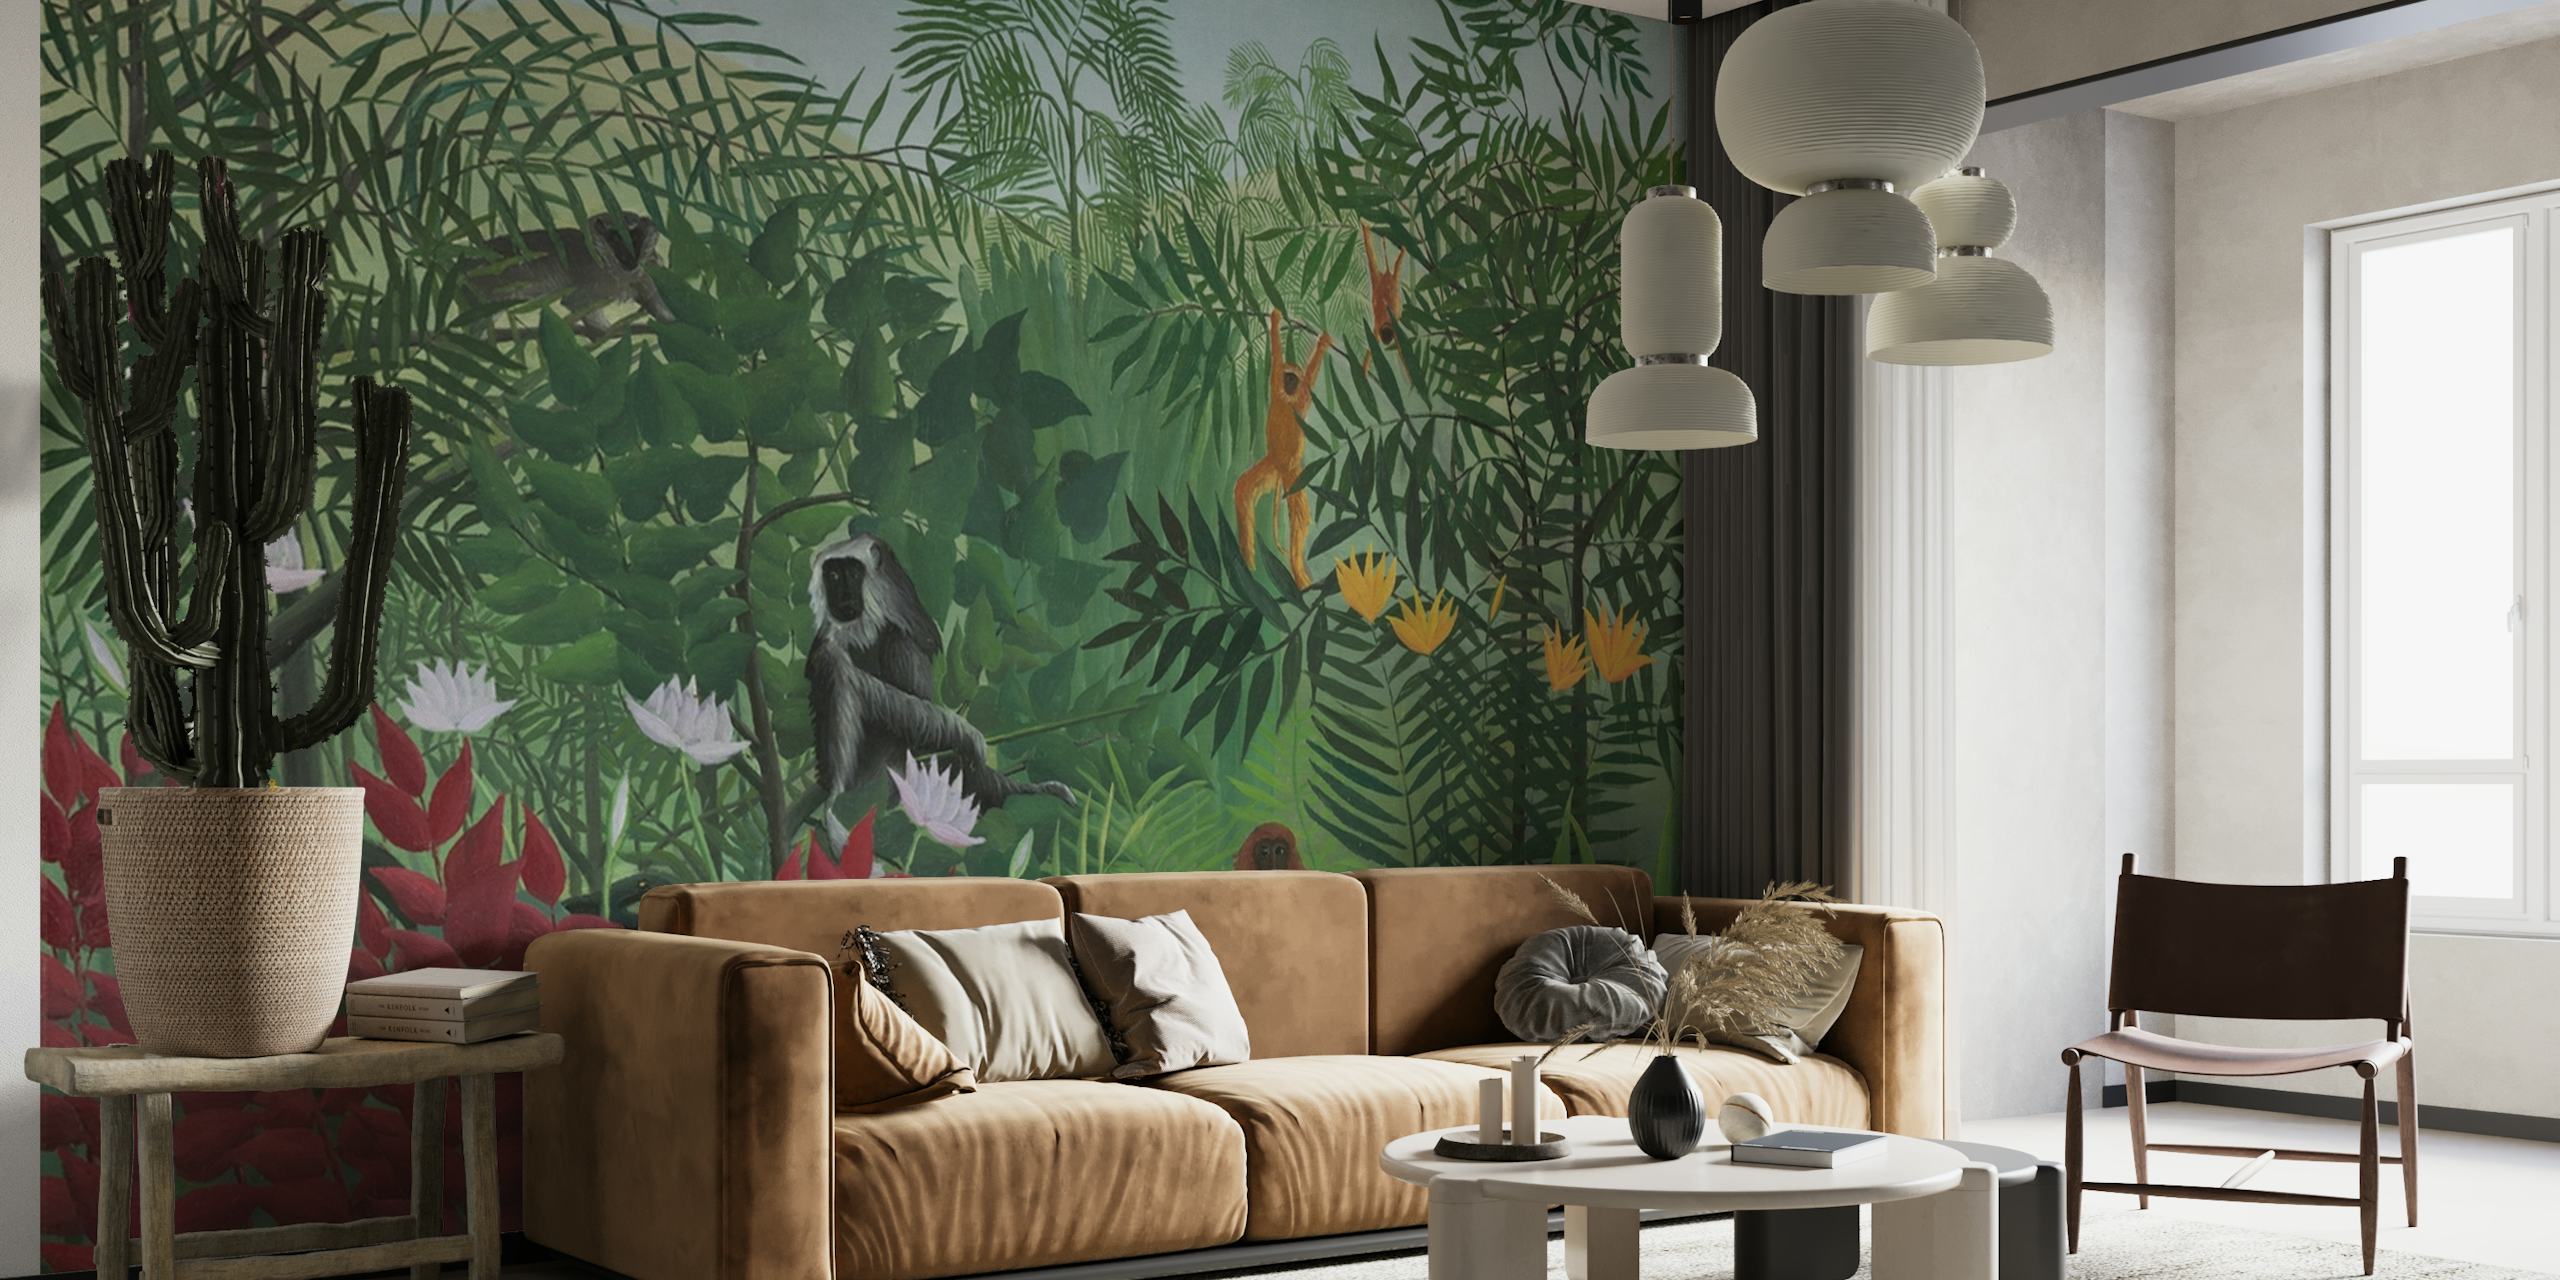 Wall mural depicting a tropical forest scene with monkeys, inspired by Henri Rousseau's art style.